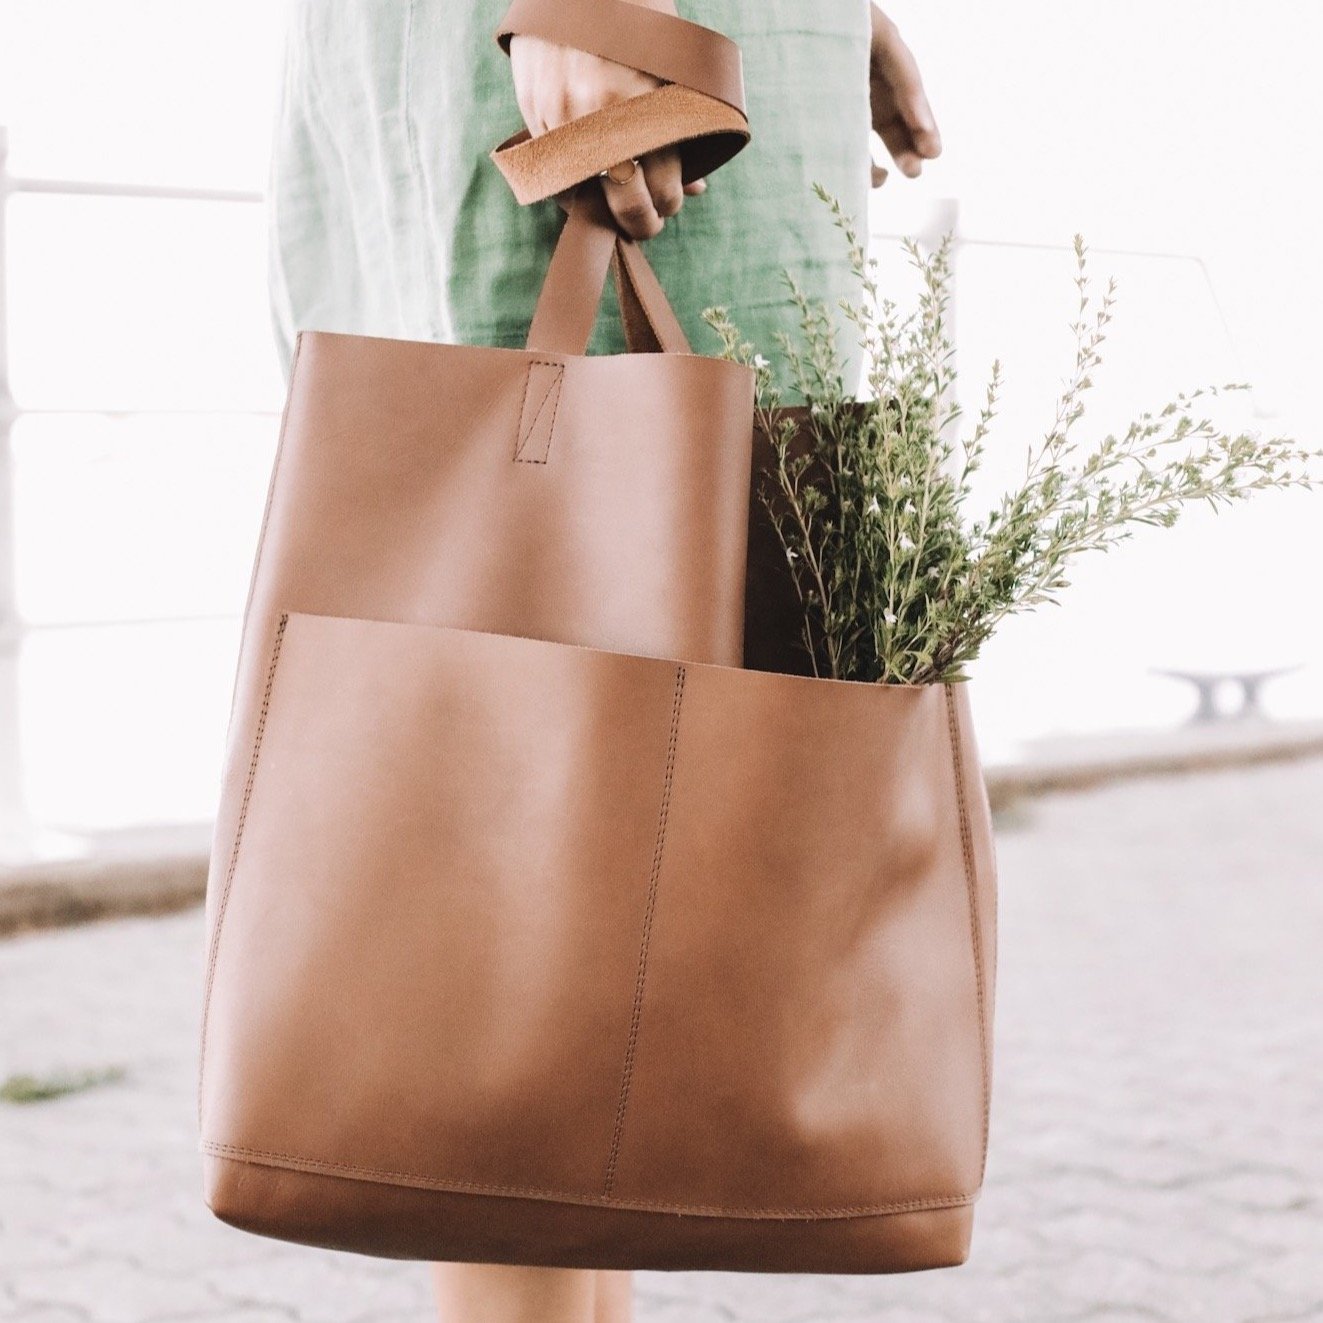 Adelisa & Co large medium brown leather tote for women.